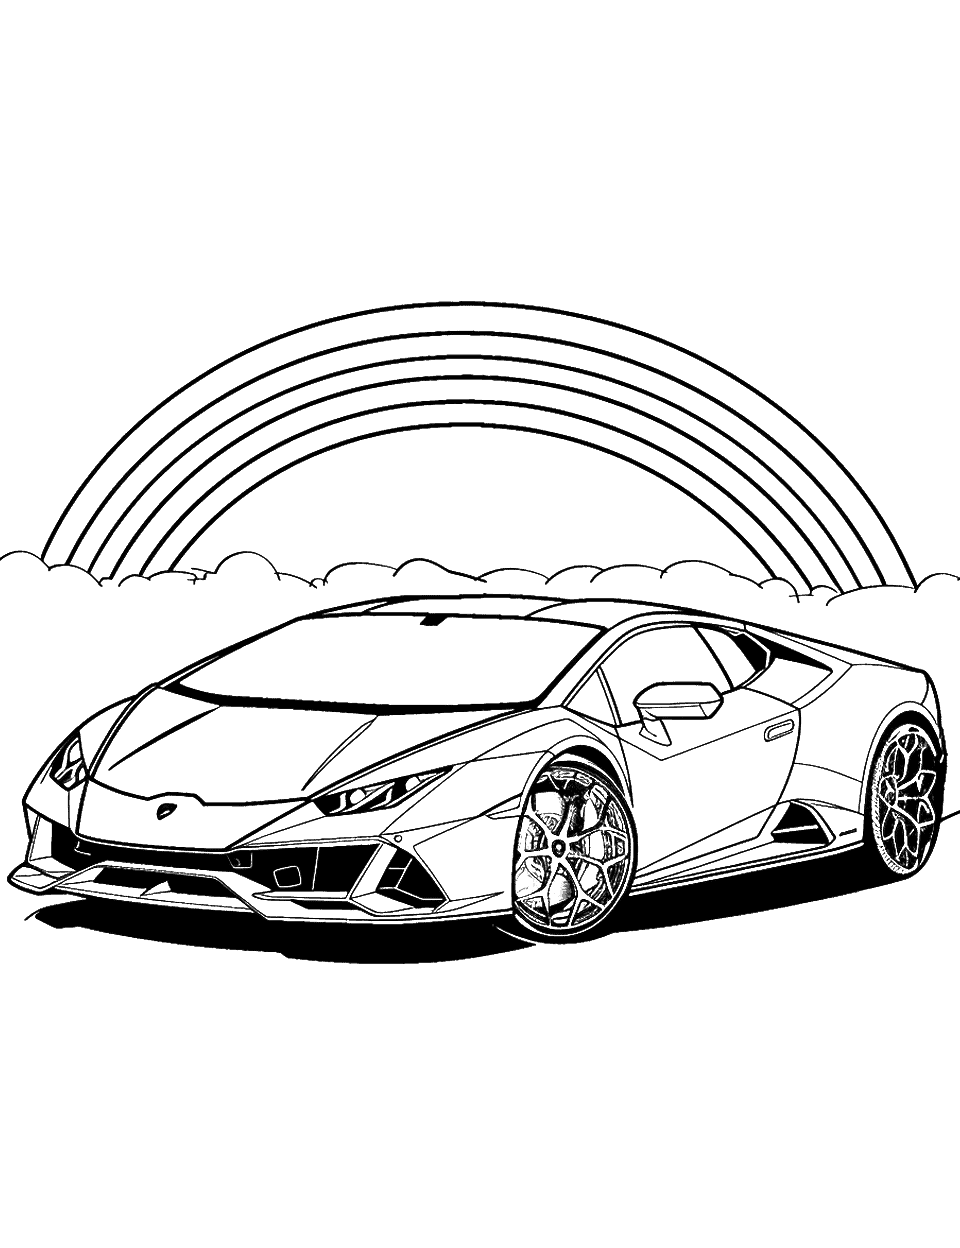 Rainbow Over Lamborghini Coloring Page - A Lamborghini parked with a beautiful rainbow arching over it.